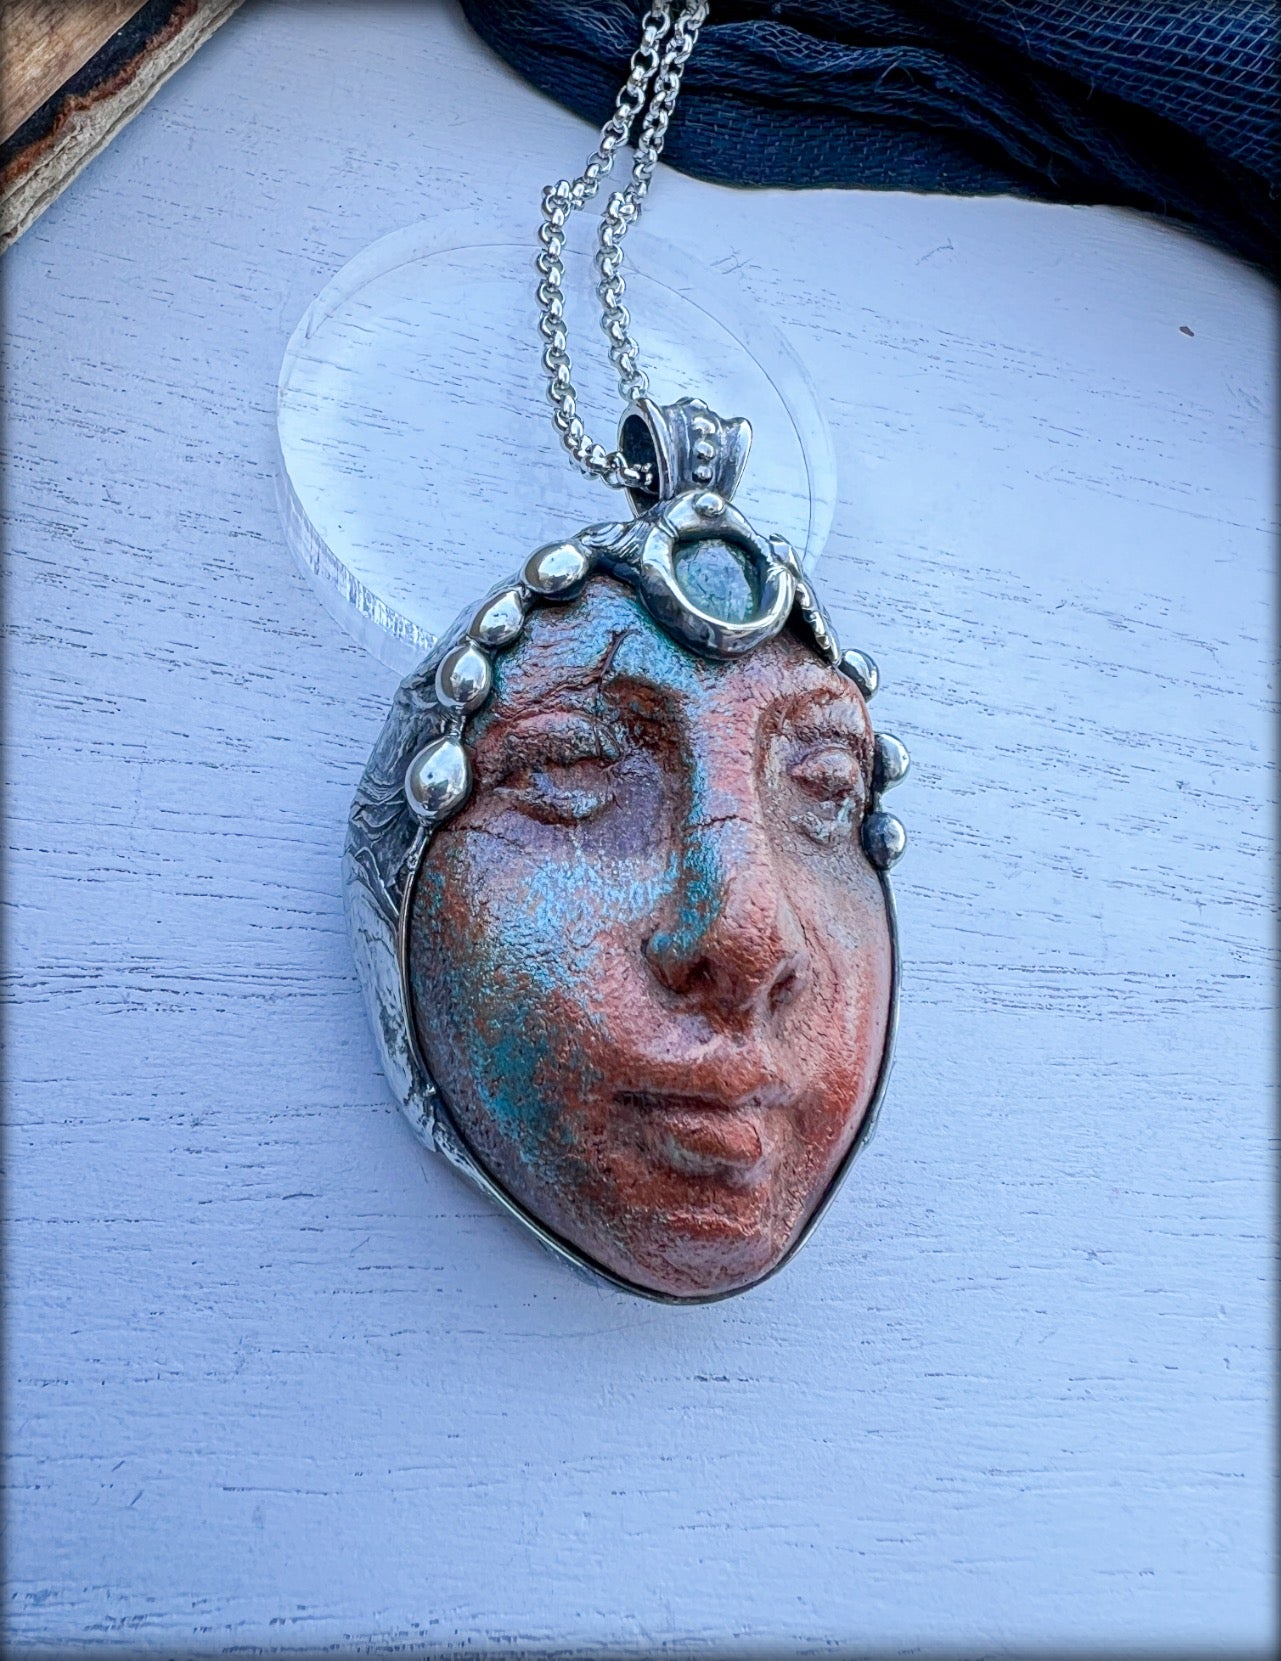 Spring goddess~hand crafted artisan crafted mask with rose cut green kyanite Tiffany technique pendant necklace~